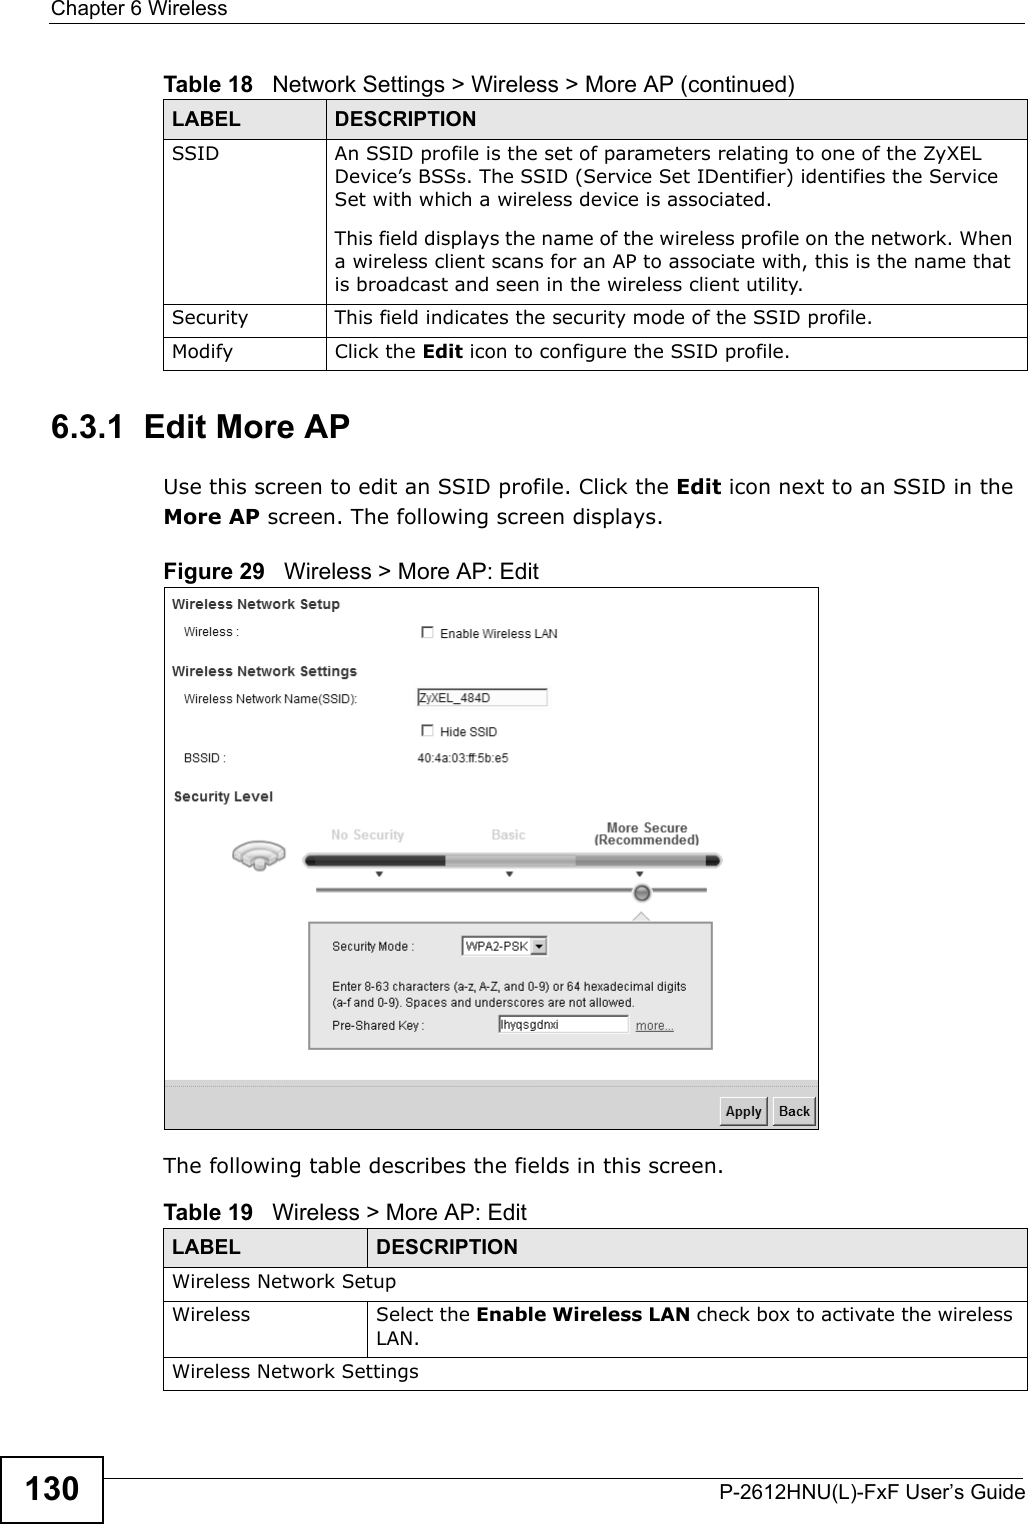 Chapter 6 WirelessP-2612HNU(L)-FxF User’s Guide1306.3.1  Edit More APUse this screen to edit an SSID profile. Click the Edit icon next to an SSID in the More AP screen. The following screen displays.Figure 29   Wireless &gt; More AP: EditThe following table describes the fields in this screen.SSID An SSID profile is the set of parameters relating to one of the ZyXEL Device’s BSSs. The SSID (Service Set IDentifier) identifies the ServiceSet with which a wireless device is associated. This field displays the name of the wireless profile on the network. When a wireless client scans for an AP to associate with, this is the name that is broadcast and seen in the wireless client utility.Security This field indicates the security mode of the SSID profile.Modify  Click the Edit icon to configure the SSID profile.Table 18   Network Settings &gt; Wireless &gt; More AP (continued)LABEL DESCRIPTIONTable 19   Wireless &gt; More AP: EditLABEL DESCRIPTIONWireless Network SetupWireless Select the Enable Wireless LAN check box to activate the wireless LAN.Wireless Network Settings